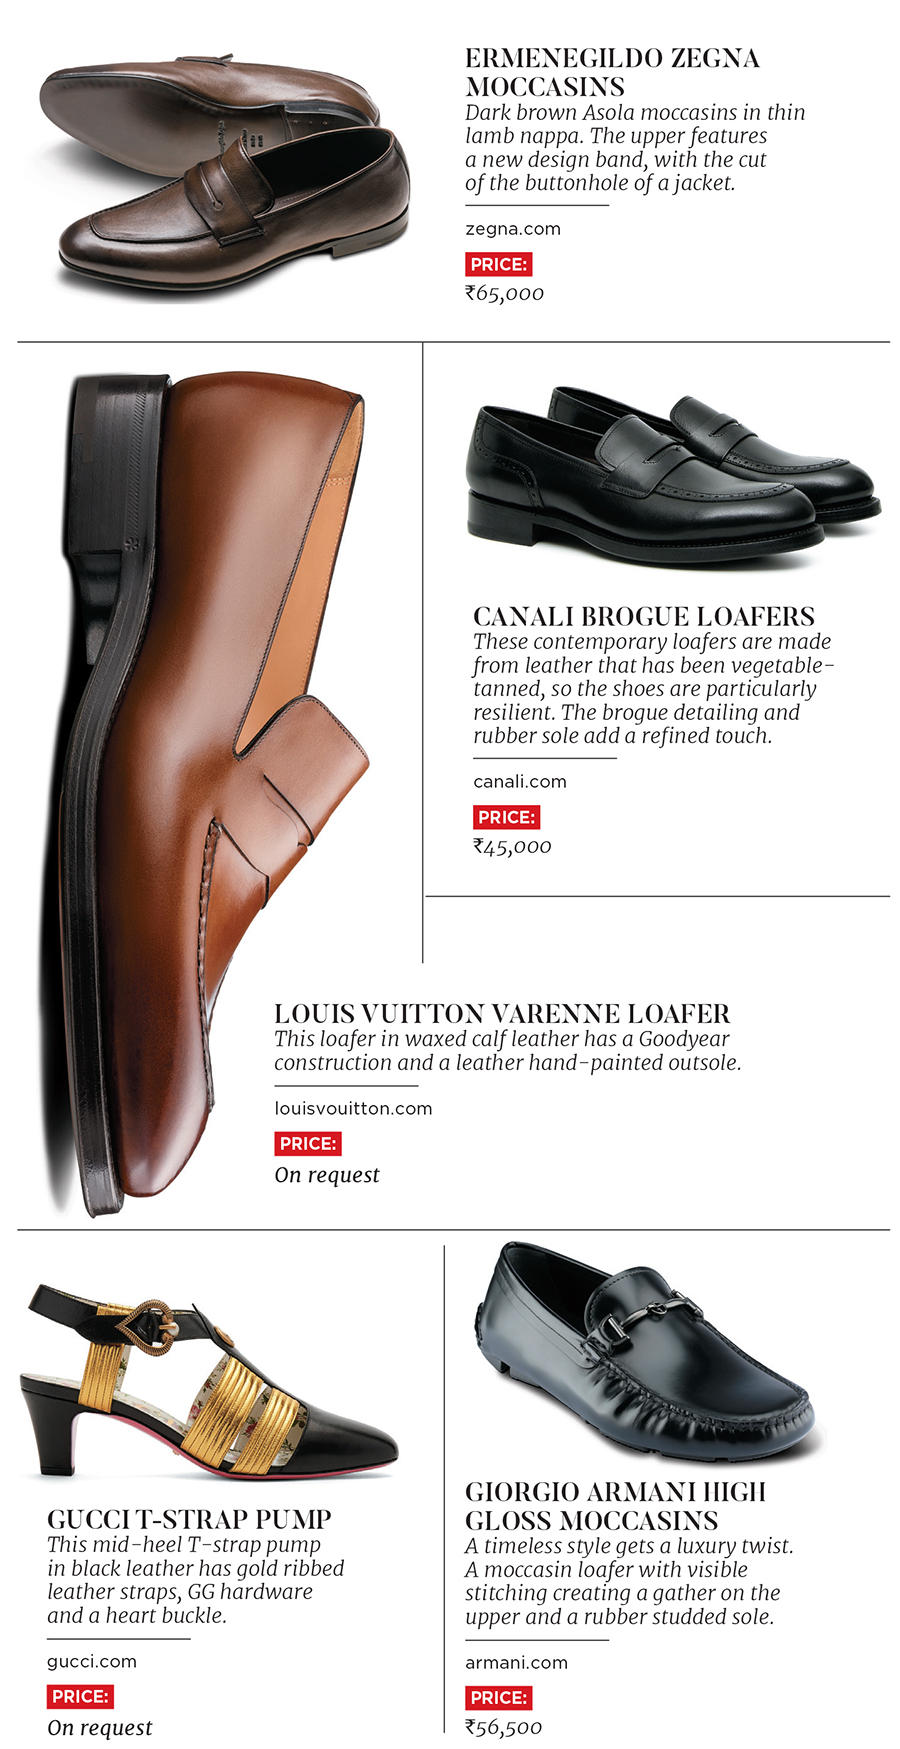 Luxury shoes: Put your best foot forward